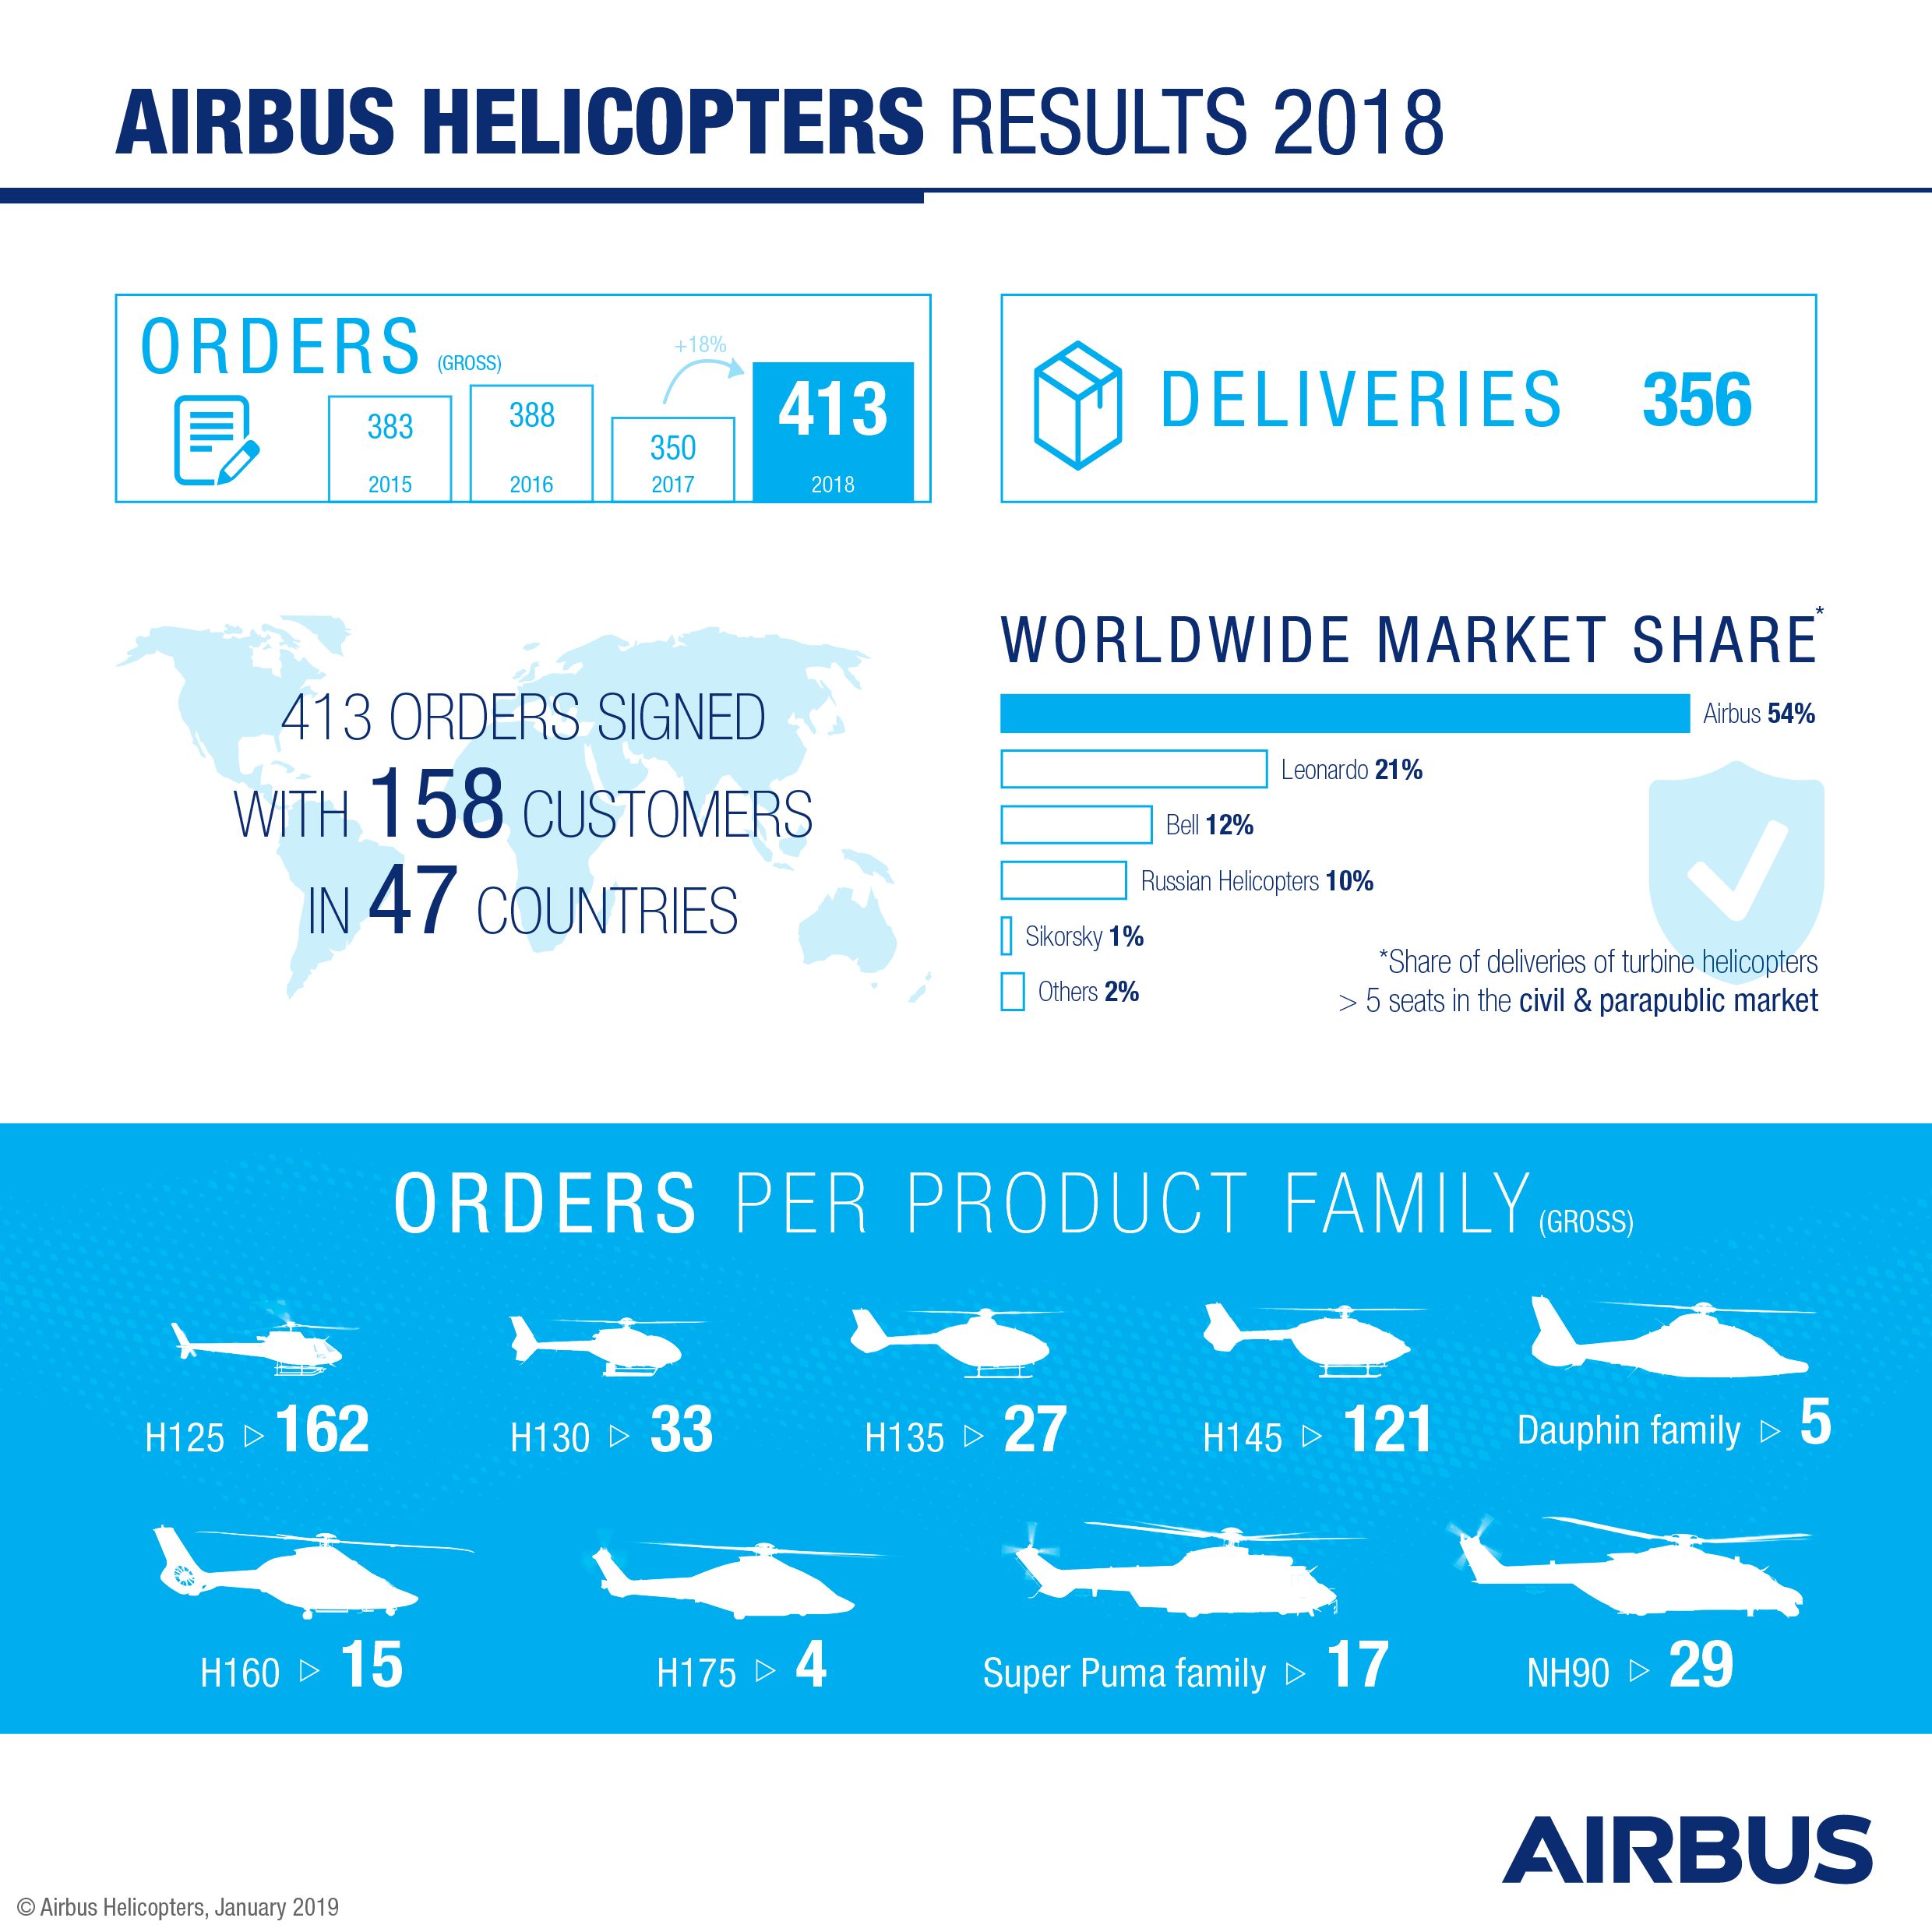 Airbus Helicopters delivered 356 rotorcraft and logged gross orders for 413 helicopters (net: 381) in 2018, up from 350 gross orders in 2017. The company also booked 148 orders for light twin-engine helicopters of the H135/H145 family and secured 15 orders for the next-generation H160. At the end of last year, its overall backlog had increased to 717 helicopters. Click to enlarge.